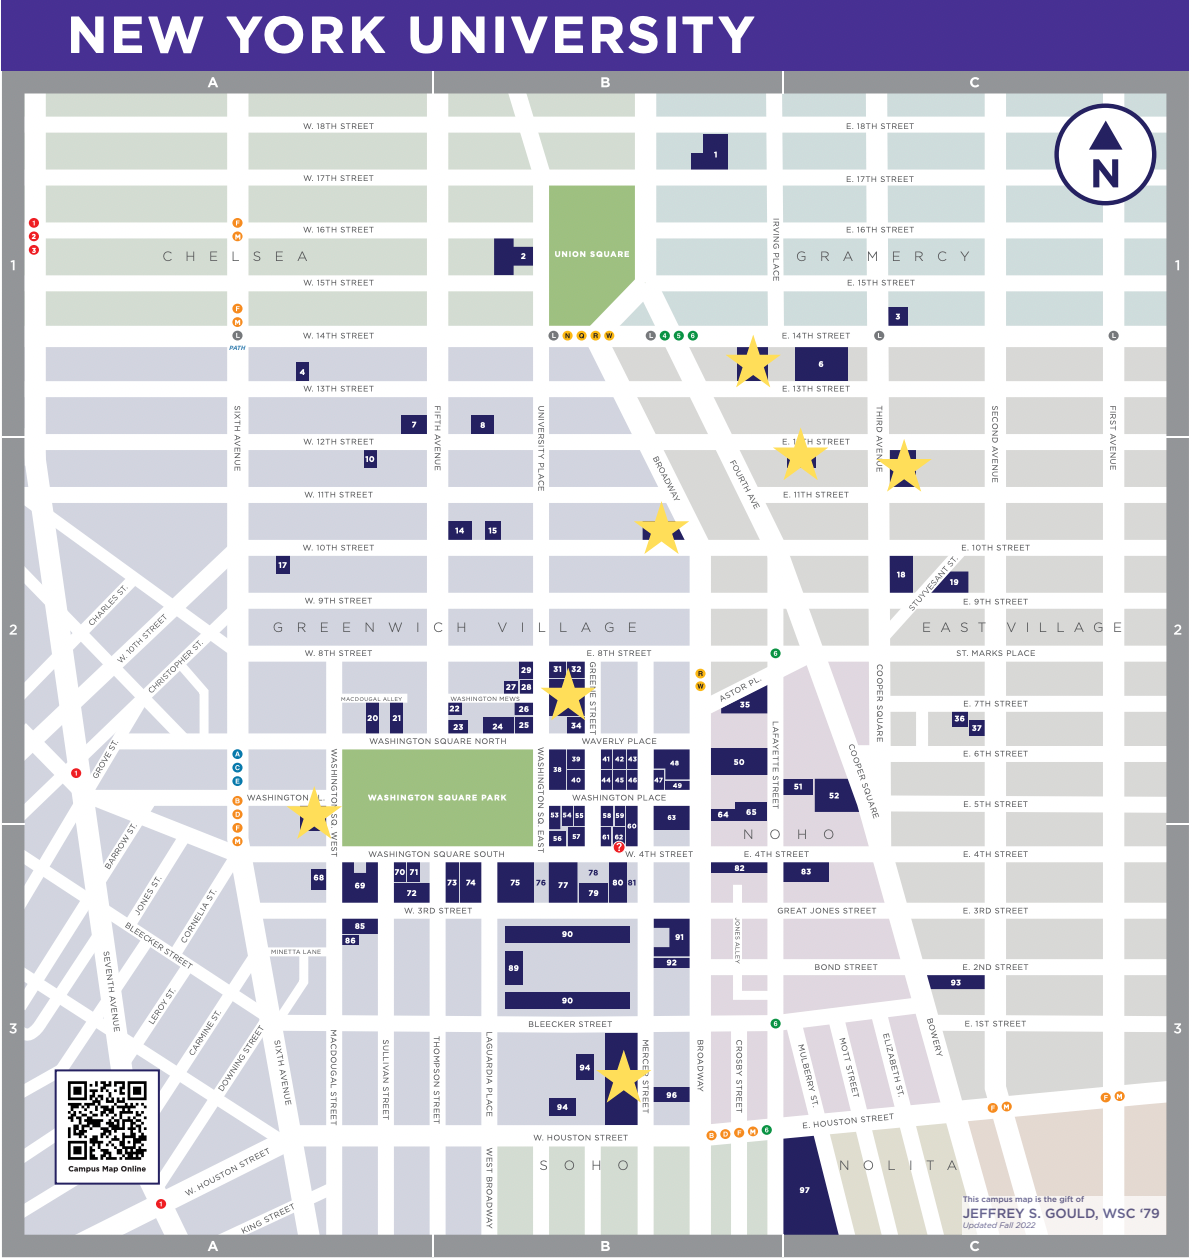 A map of the NYU Washington Square campus; star icons indicate the locations of first-year residential halls.